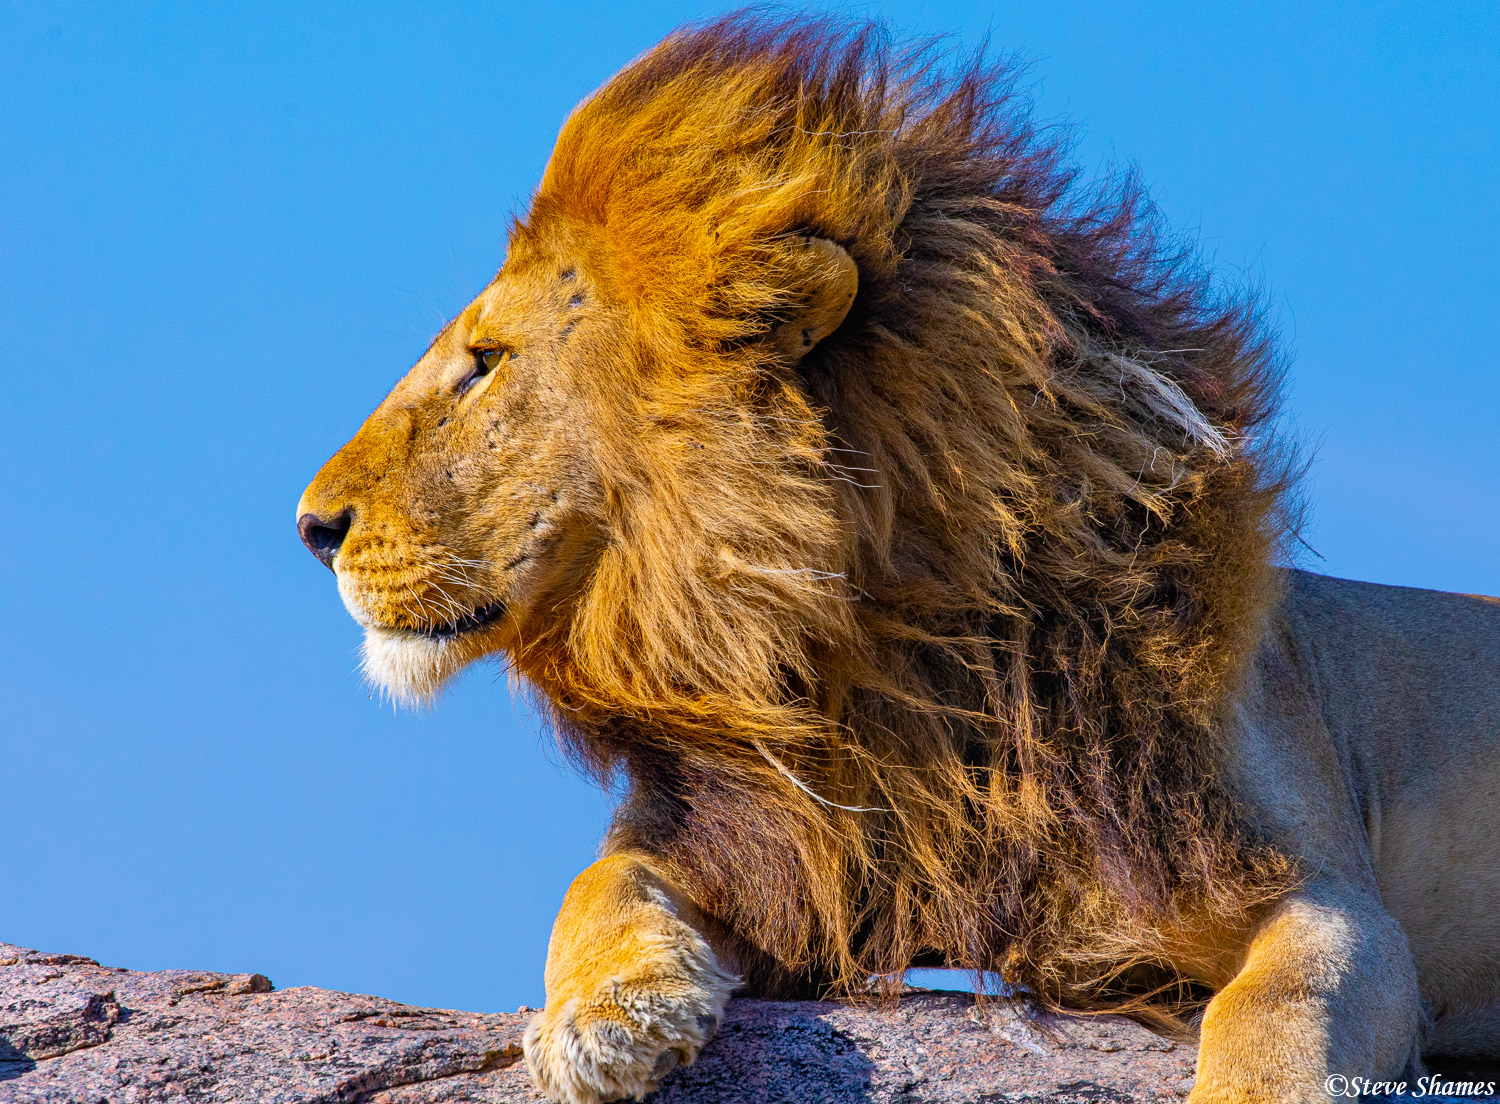 A magnificent looking lion side view.